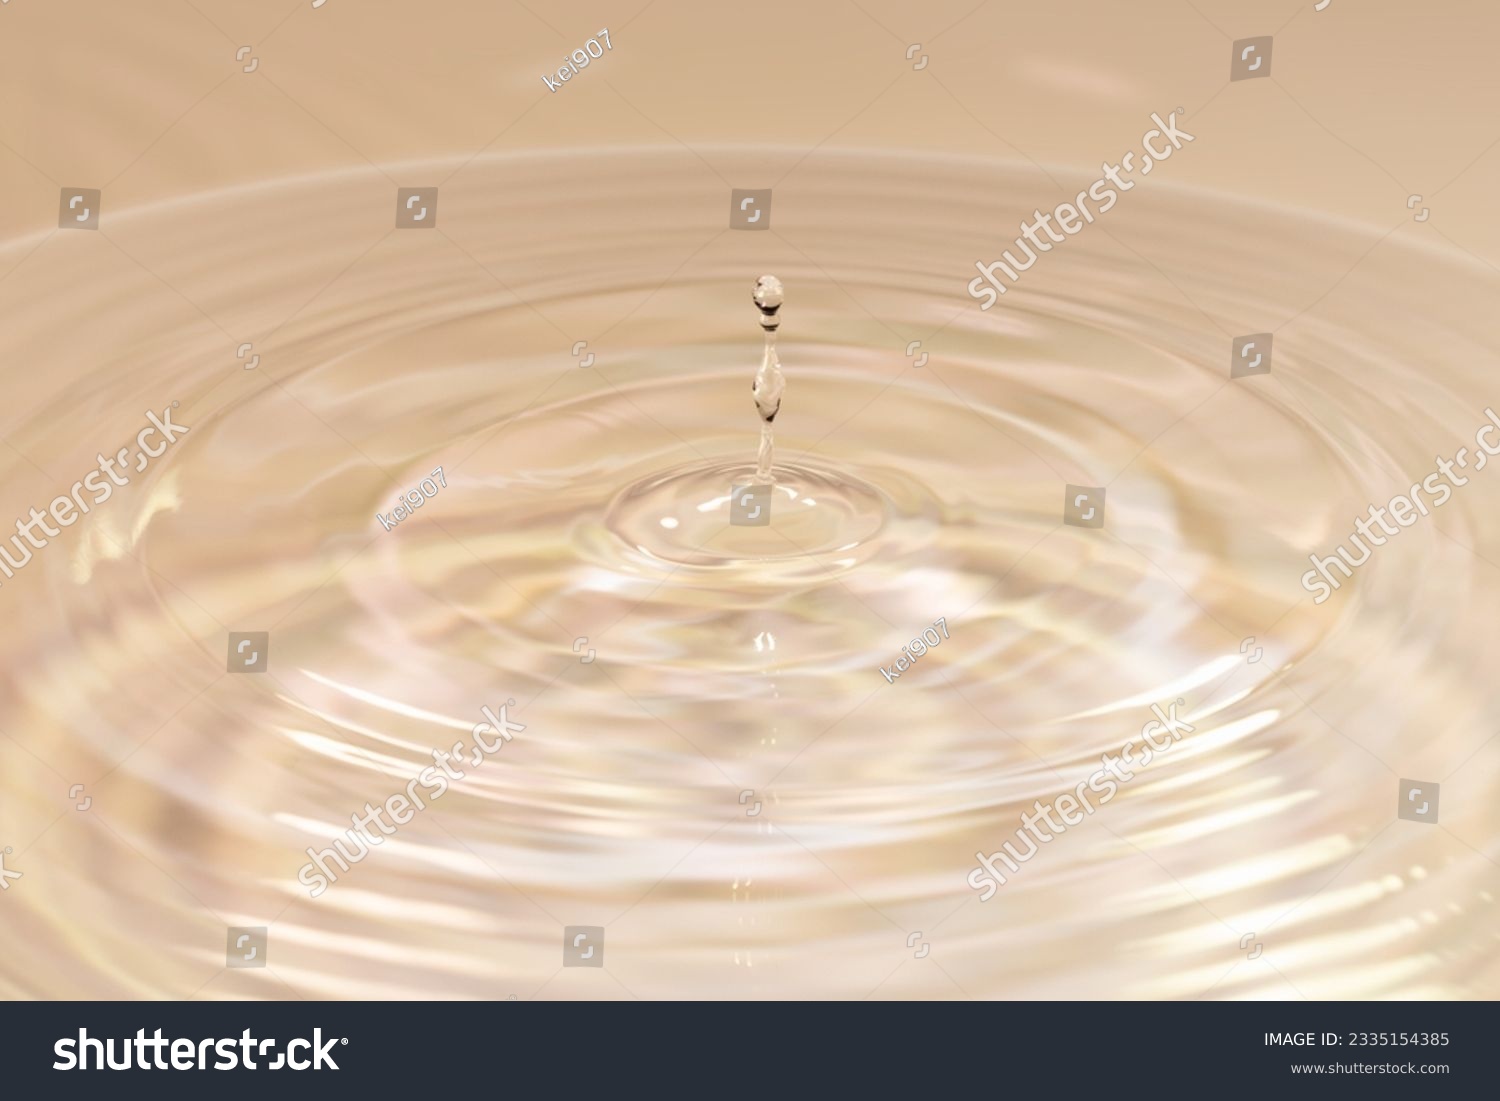 Water drops falling on water surface #2335154385